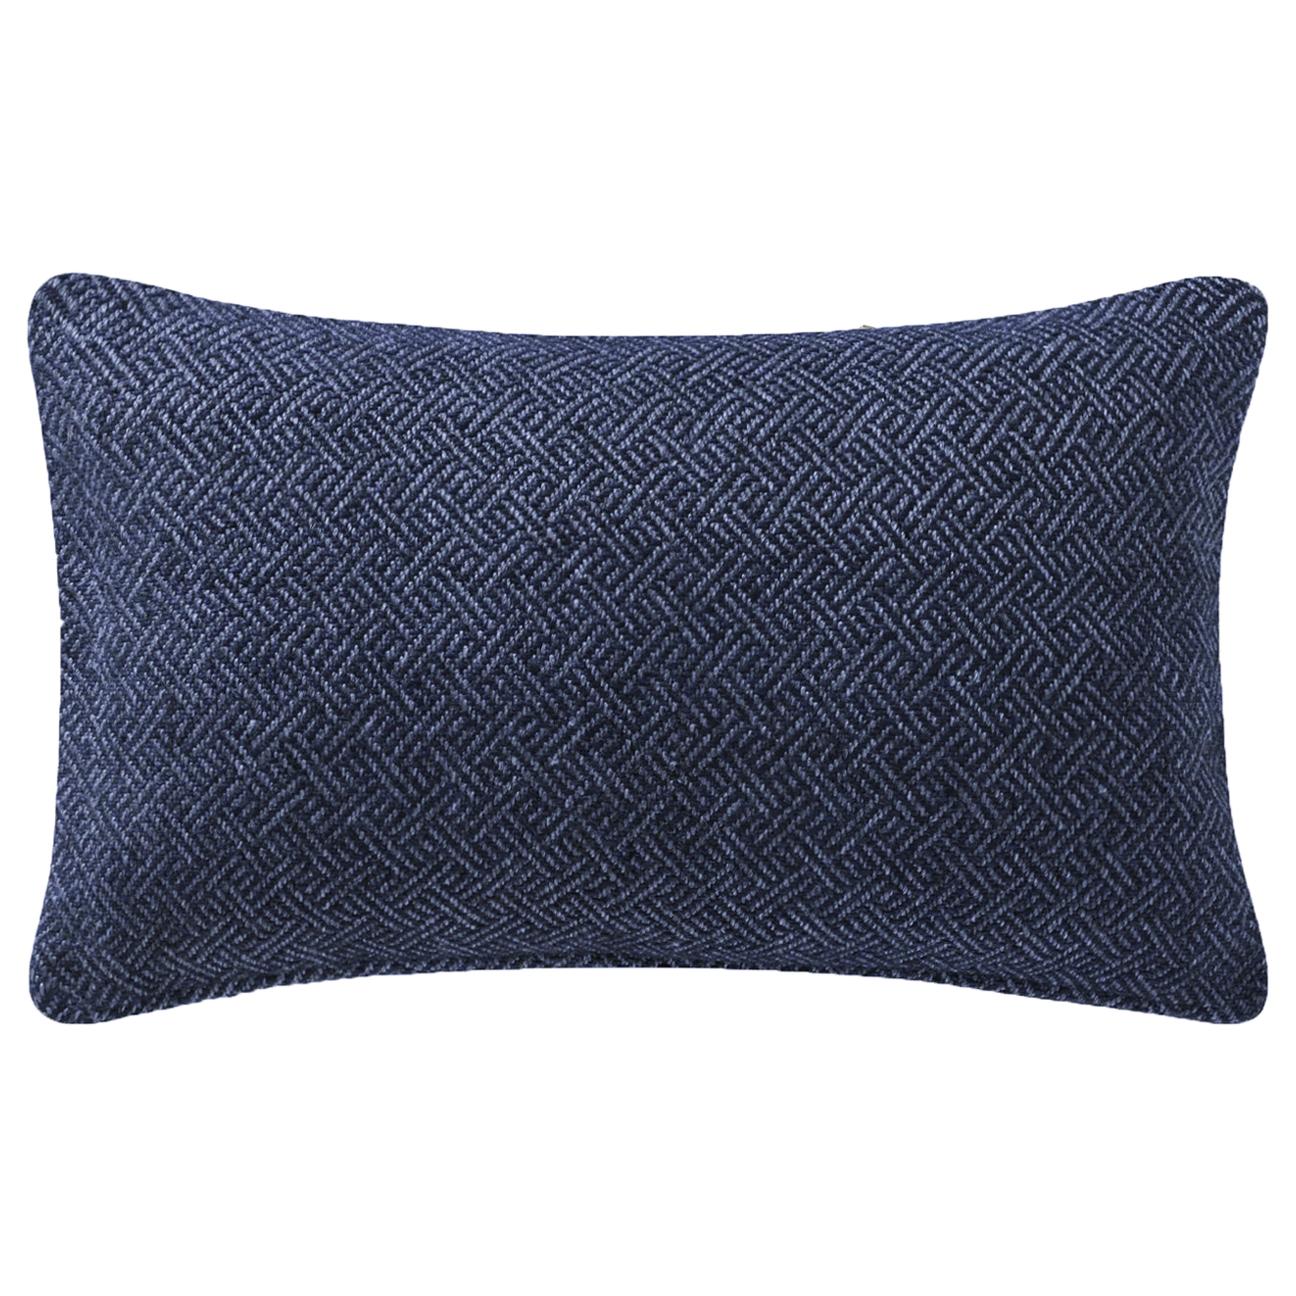 Ben Soleimani Angled Diamond Pillow Cover - Navy 13"x21" For Sale